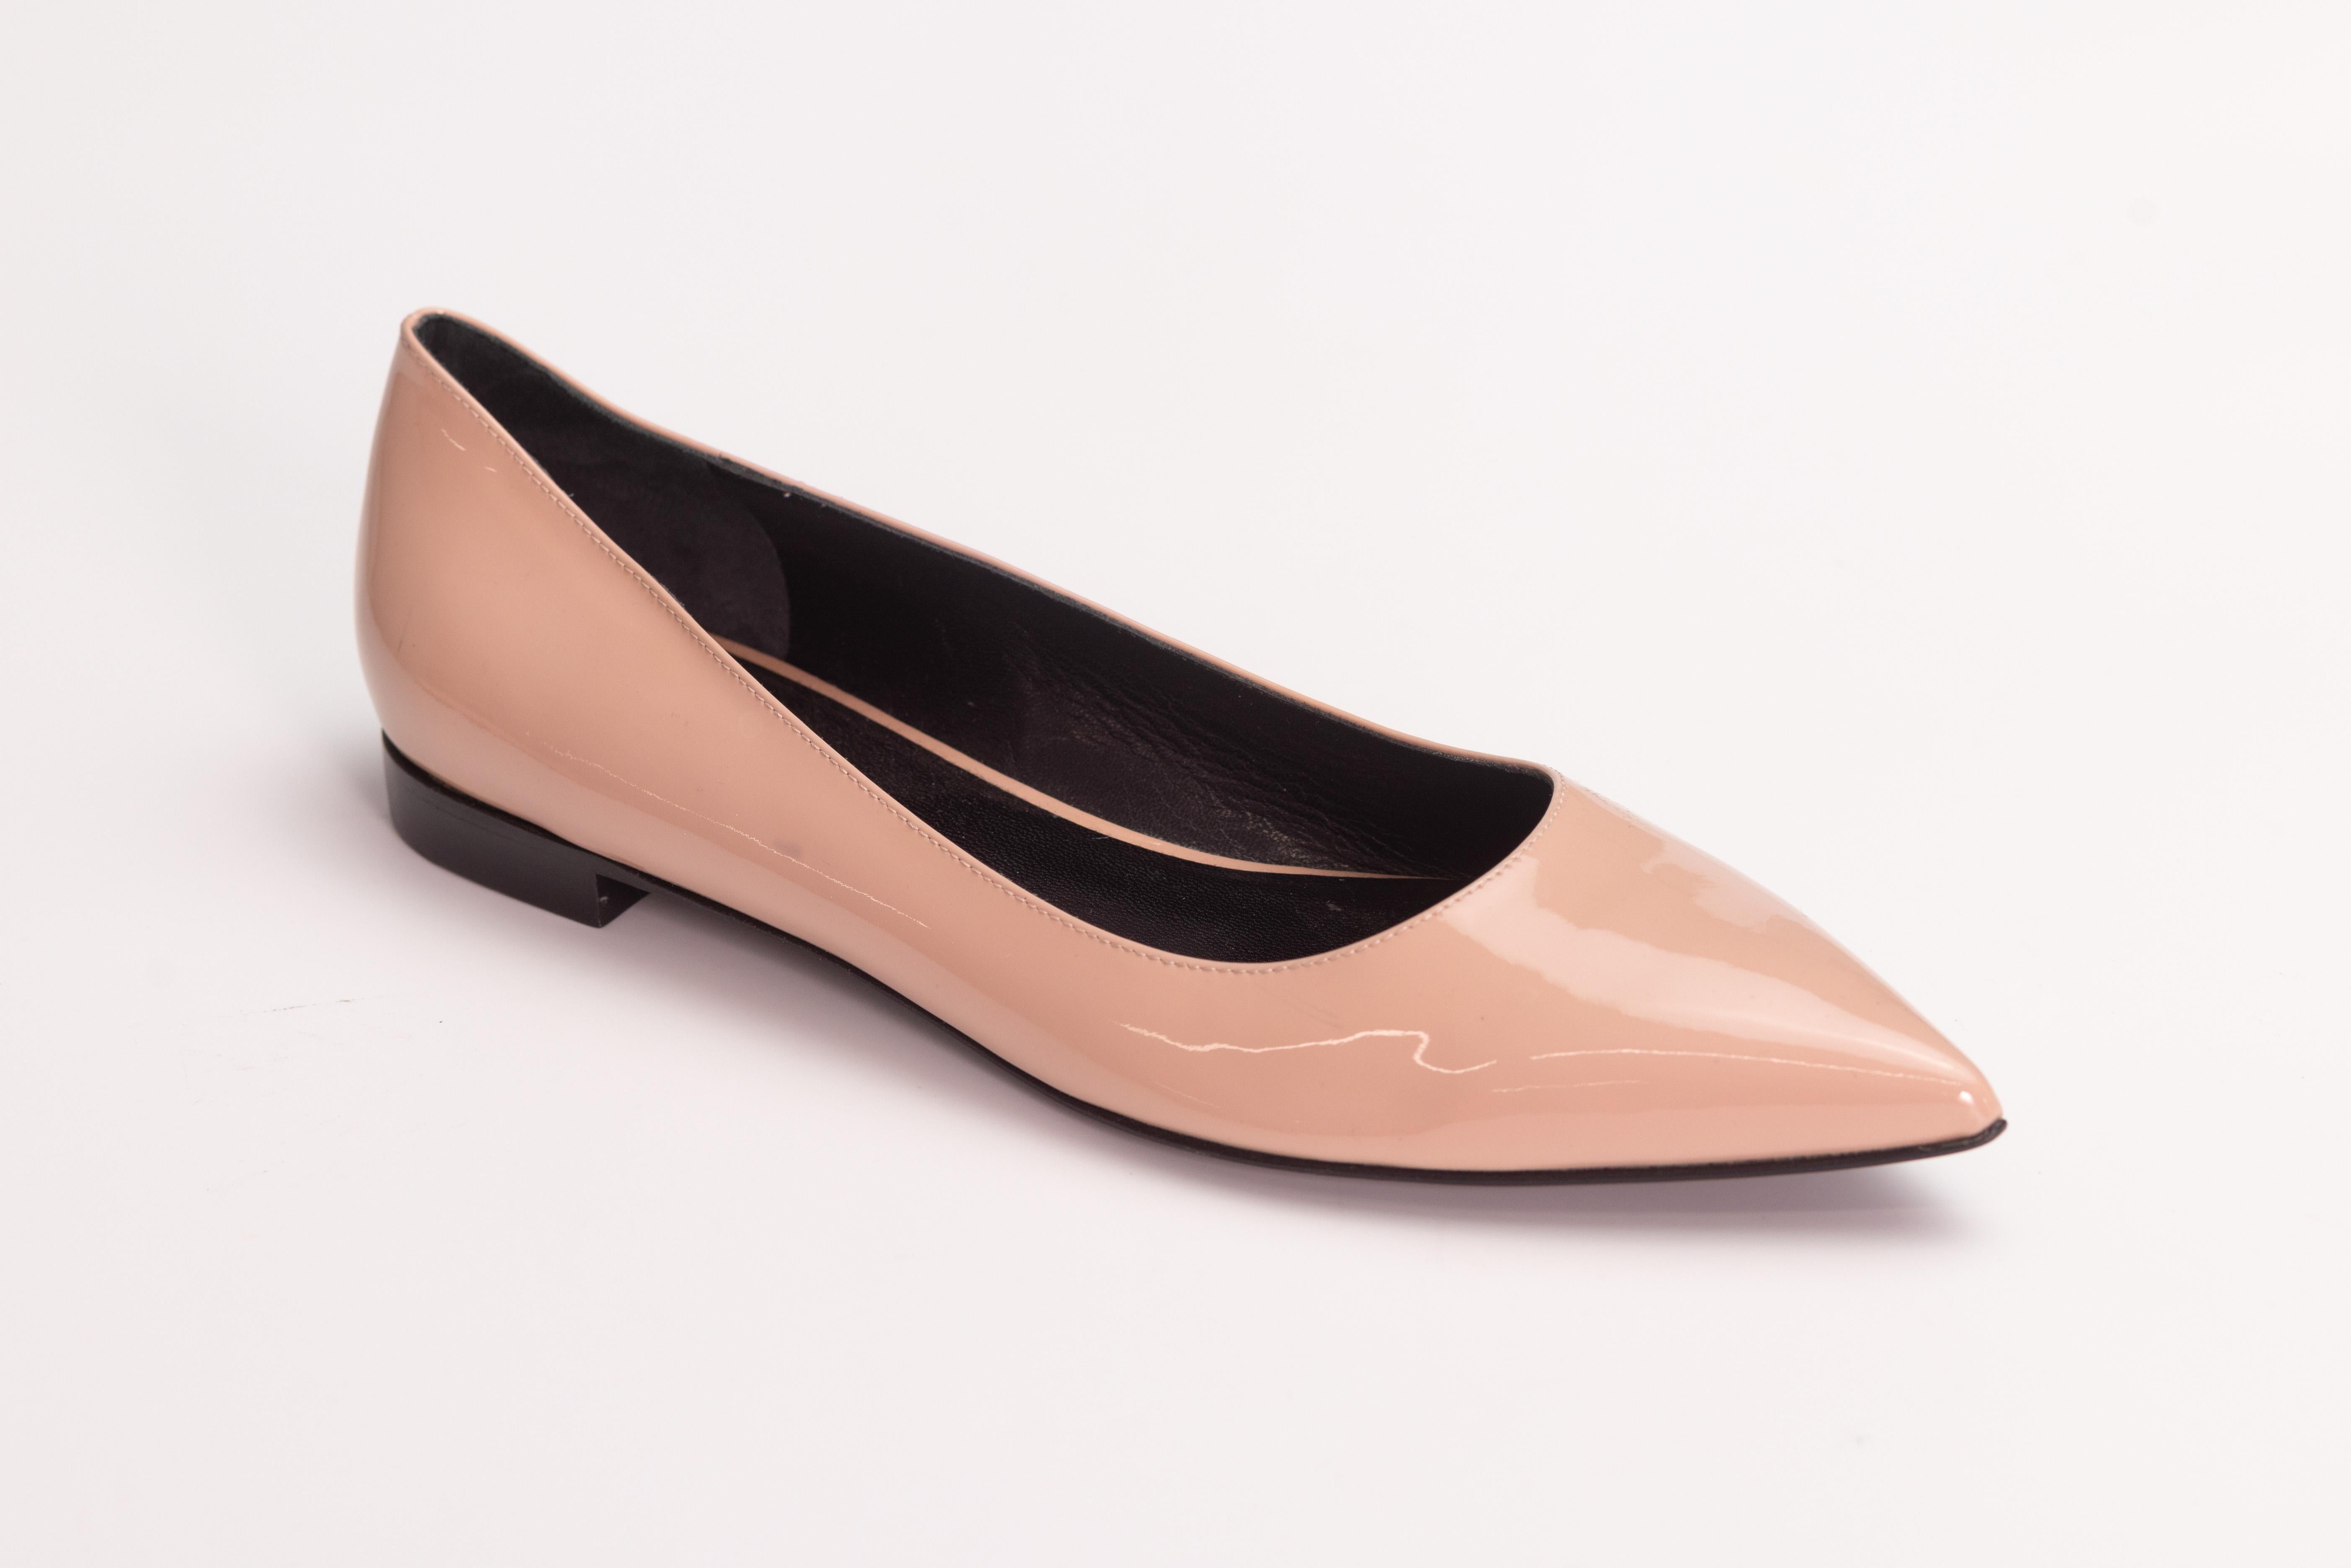 Color: Nude
Material: Patent leather
Item Code: 359226
Size: 41 EU
Condition: Very good. Faint hairline scratches. Scratches to the under soles.
Comes with: Dust bag

Made in Italy